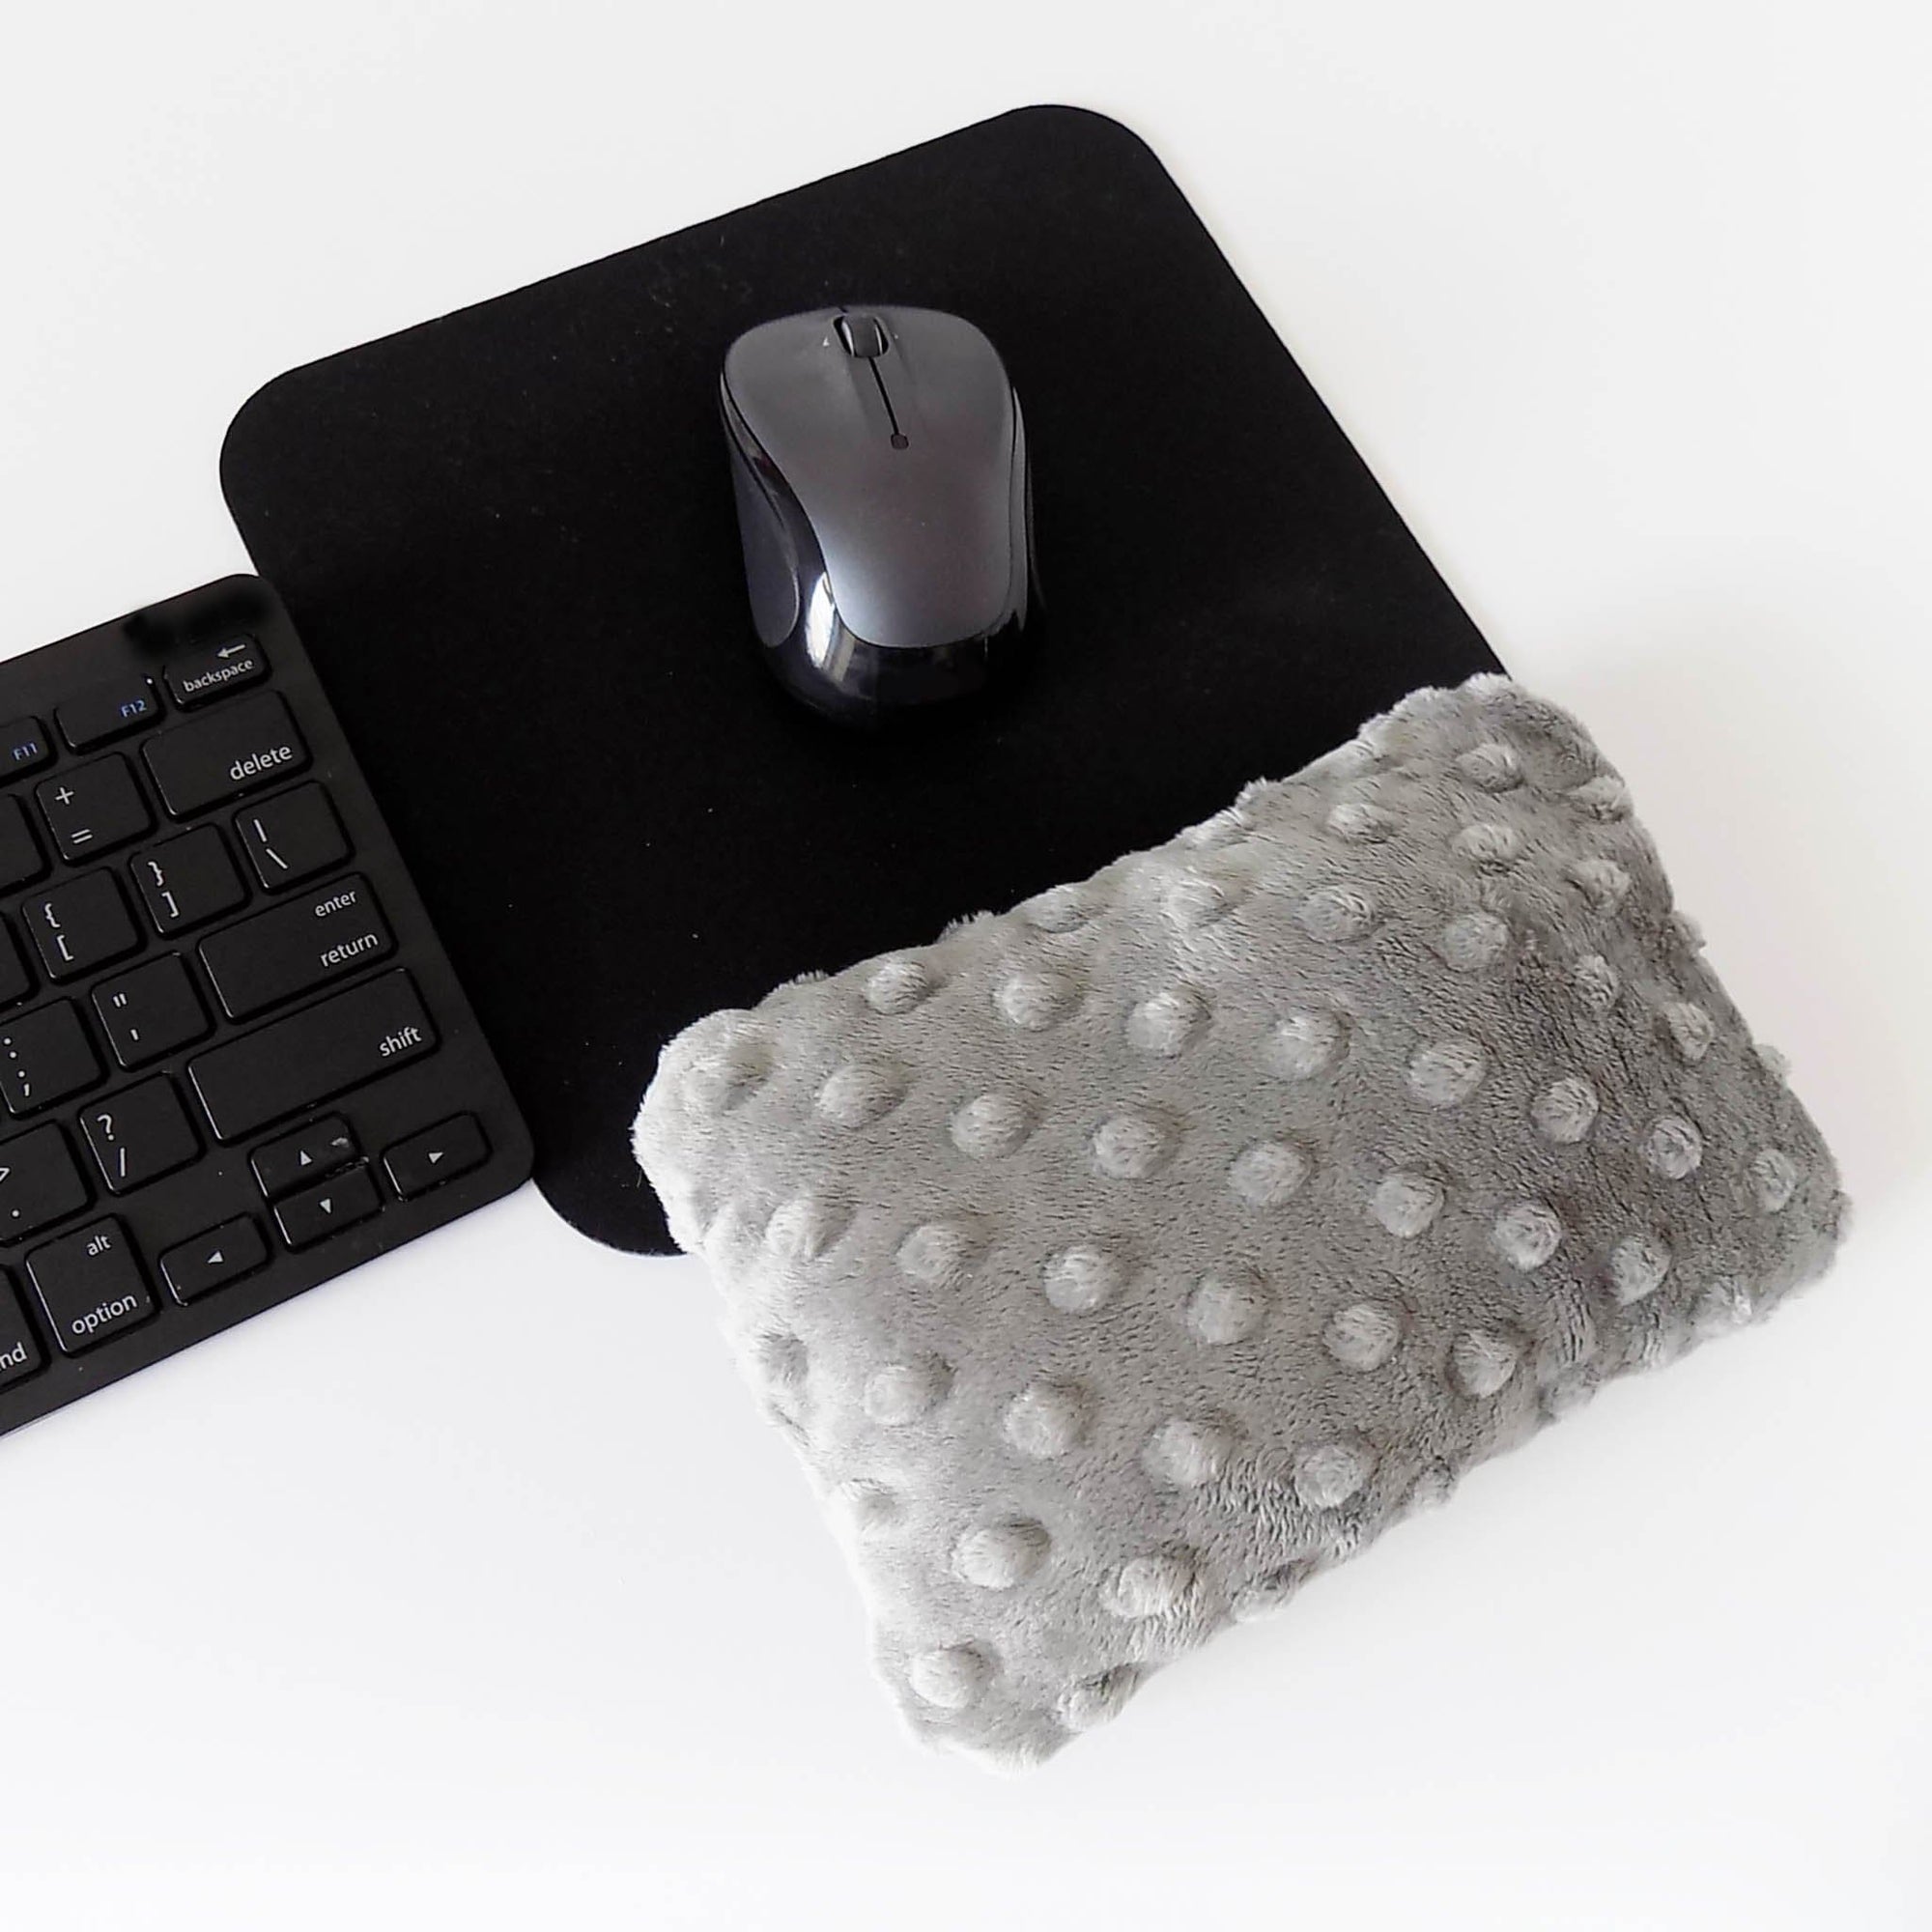 Accessories for Weighted Blankets